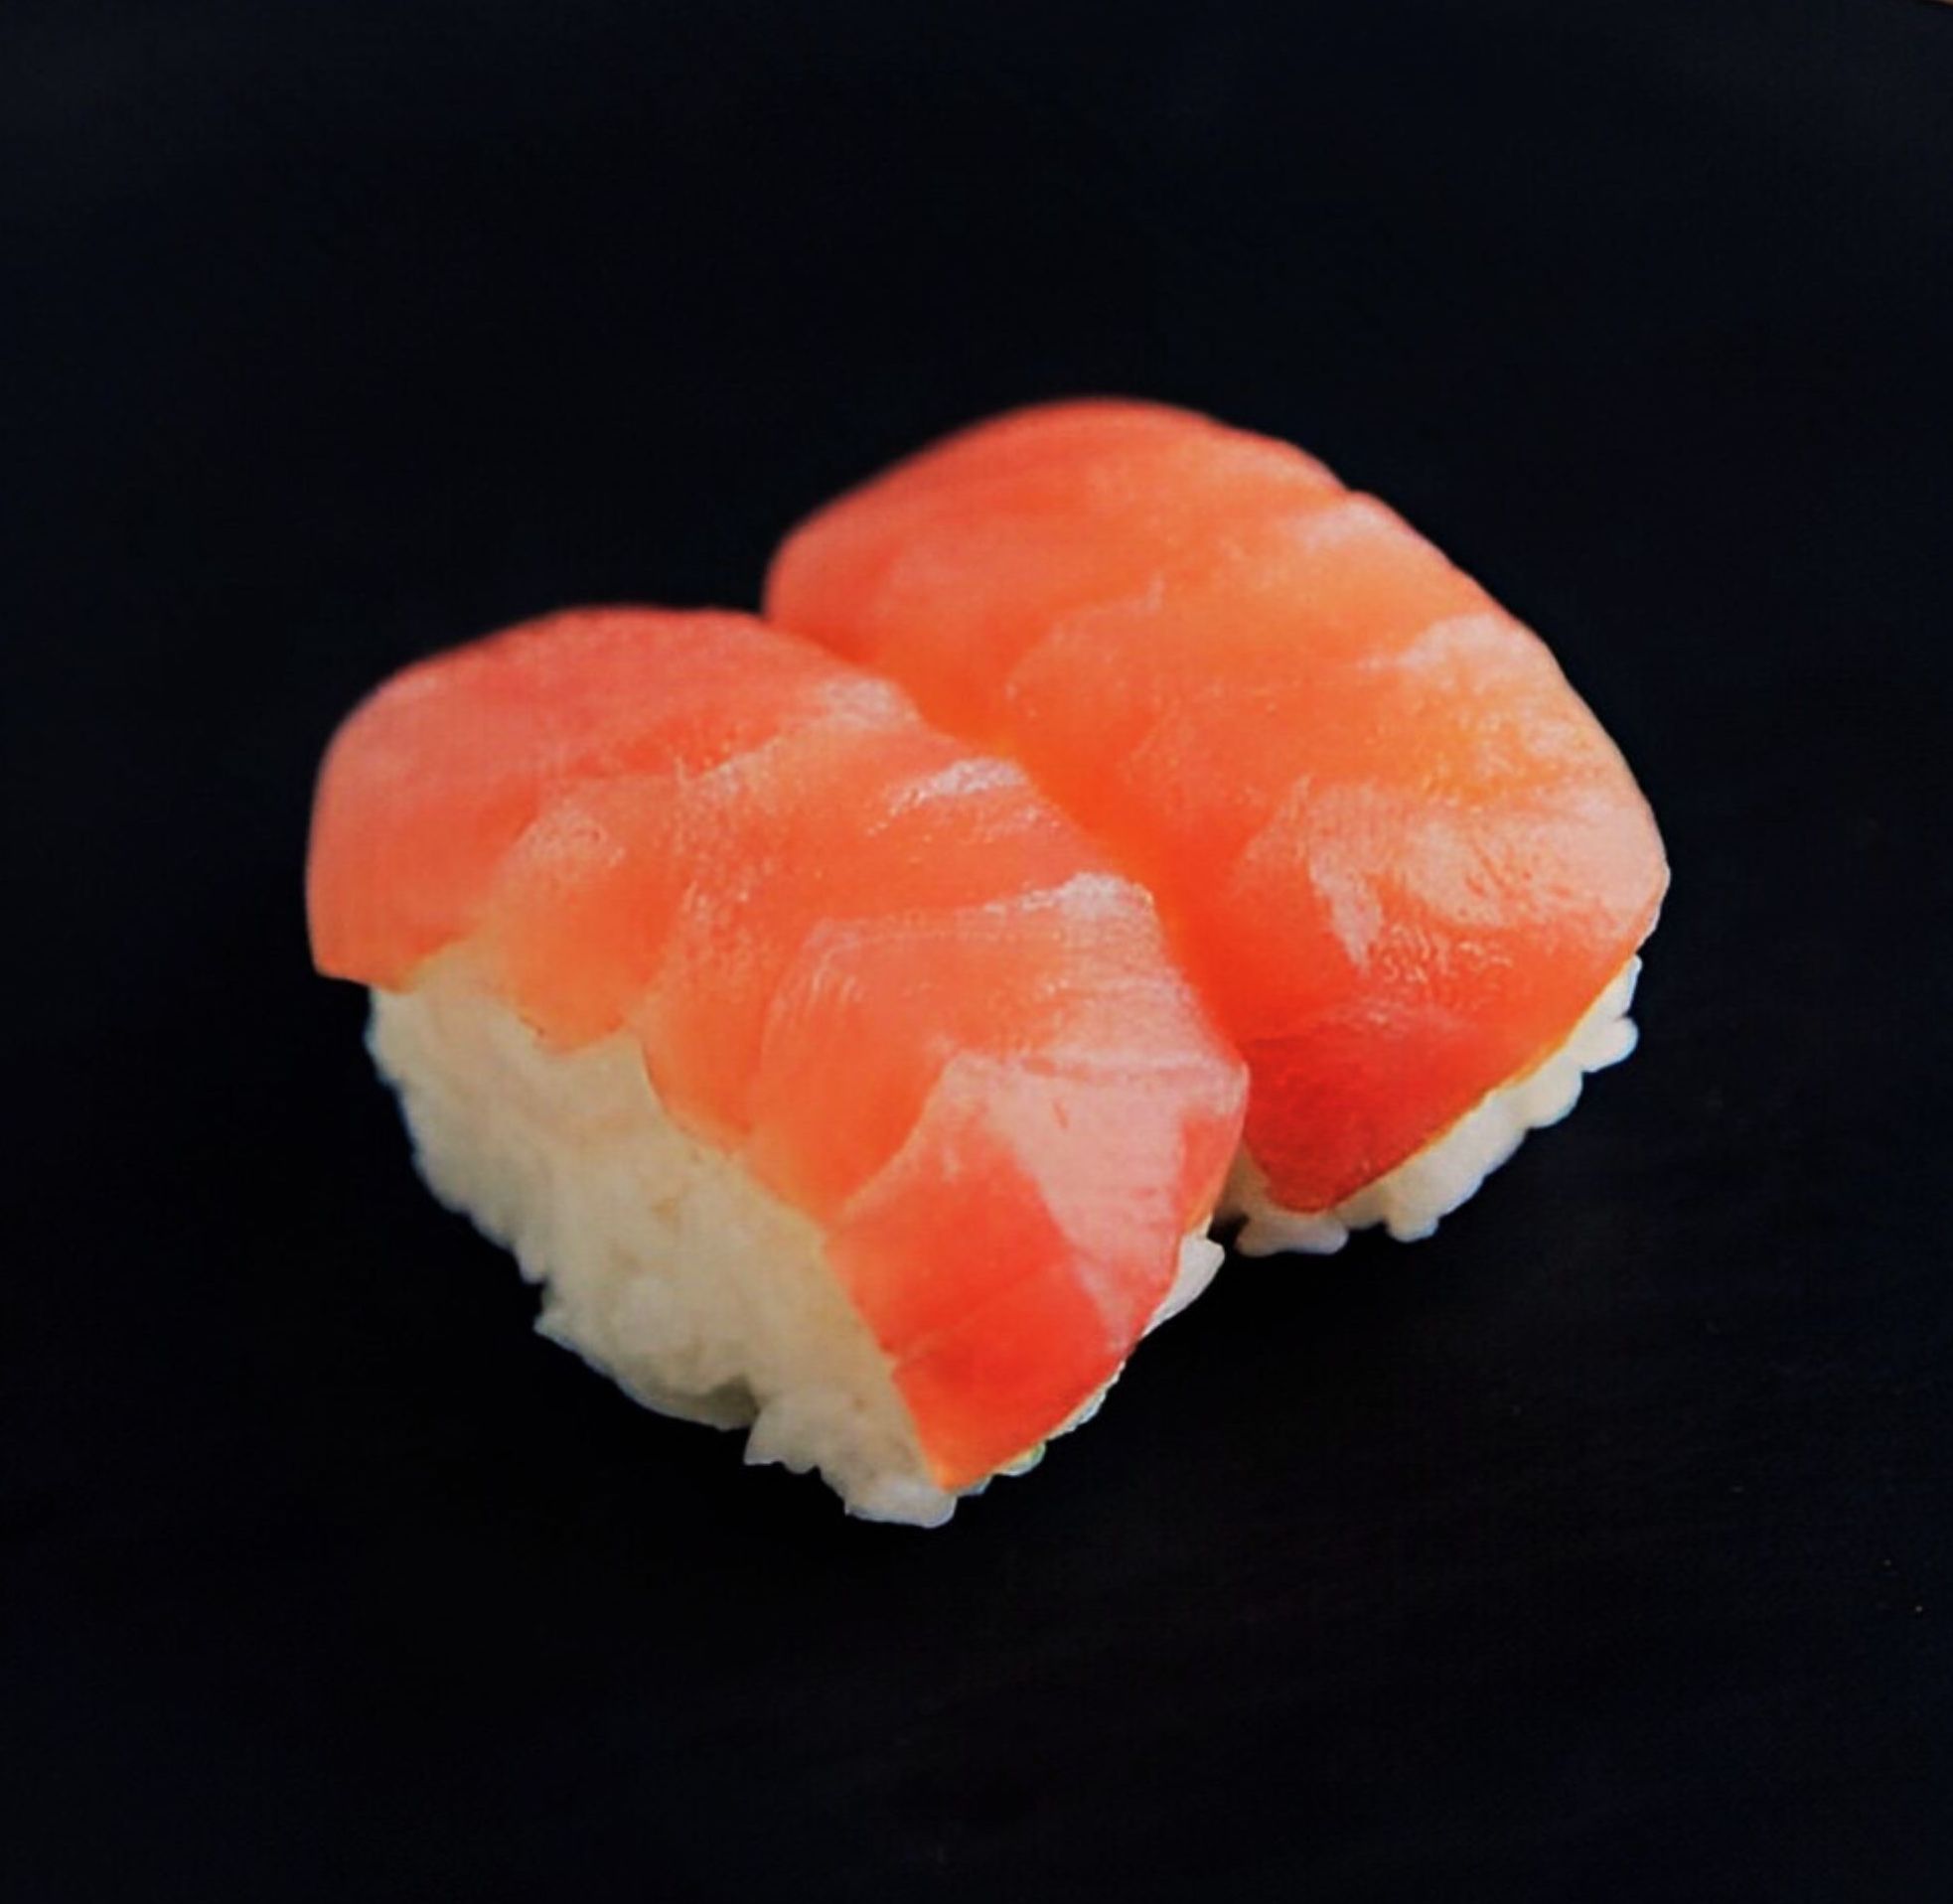 Where To Buy Sushi Grade Salmon: Guide To High Quality Fish